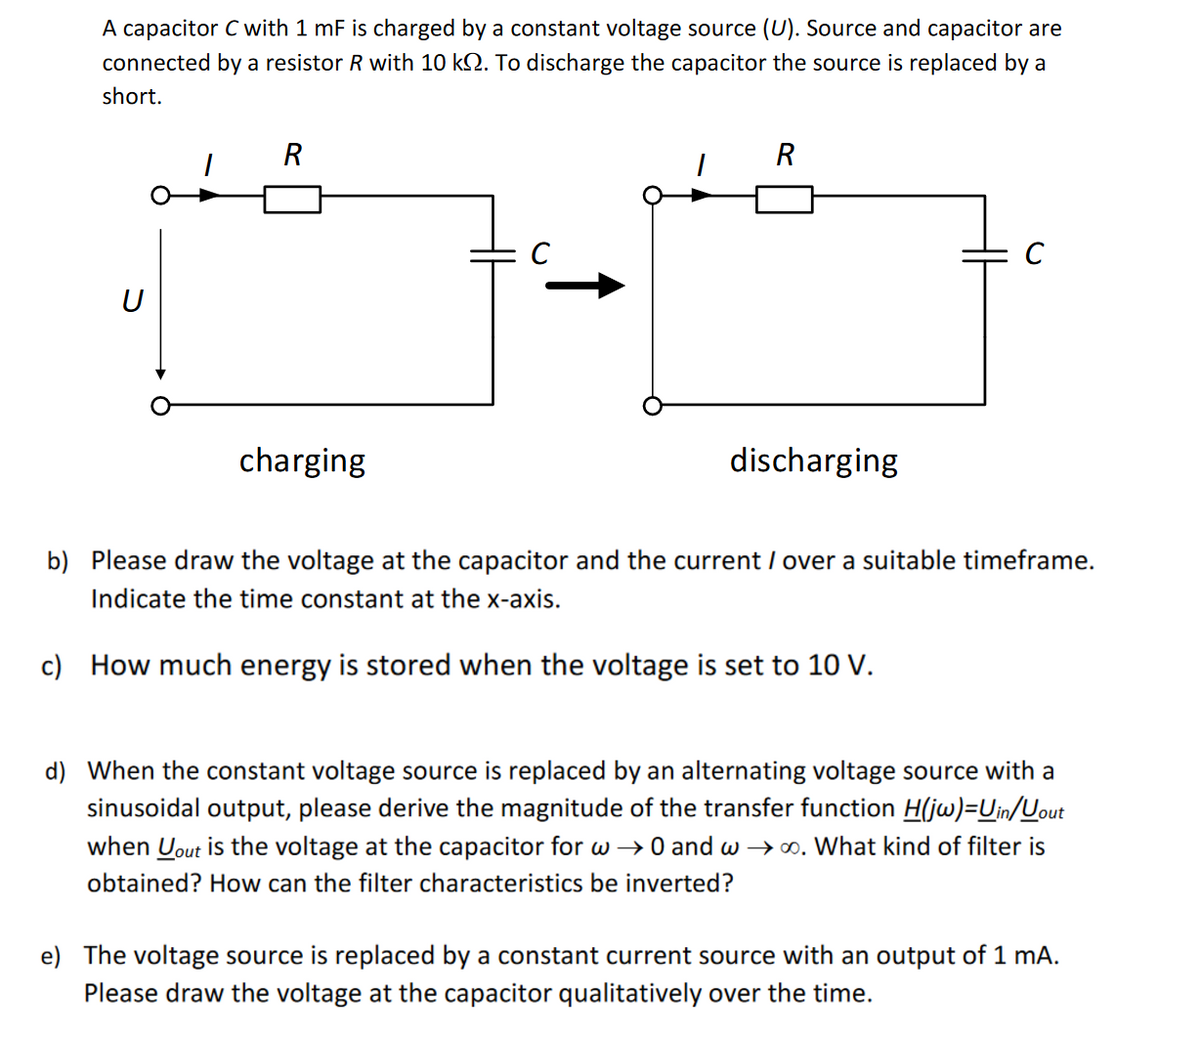 A capacitor C with 1 mF is charged by a constant voltage source (U). Source and capacitor are
connected by a resistor R with 10 kQ. To discharge the capacitor the source is replaced by a
short.
U
R
charging
C
R
discharging
b) Please draw the voltage at the capacitor and the current / over a suitable timeframe.
Indicate the time constant at the x-axis.
c) How much energy is stored when the voltage is set to 10 V.
d) When the constant voltage source is replaced by an alternating voltage source with a
sinusoidal output, please derive the magnitude of the transfer function H(jw)=Uin/out
when yout is the voltage at the capacitor for w → 0 and w→∞. What kind of filter is
obtained? How can the filter characteristics be inverted?
e) The voltage source is replaced by a constant current source with an output of 1 mA.
Please draw the voltage at the capacitor qualitatively over the time.